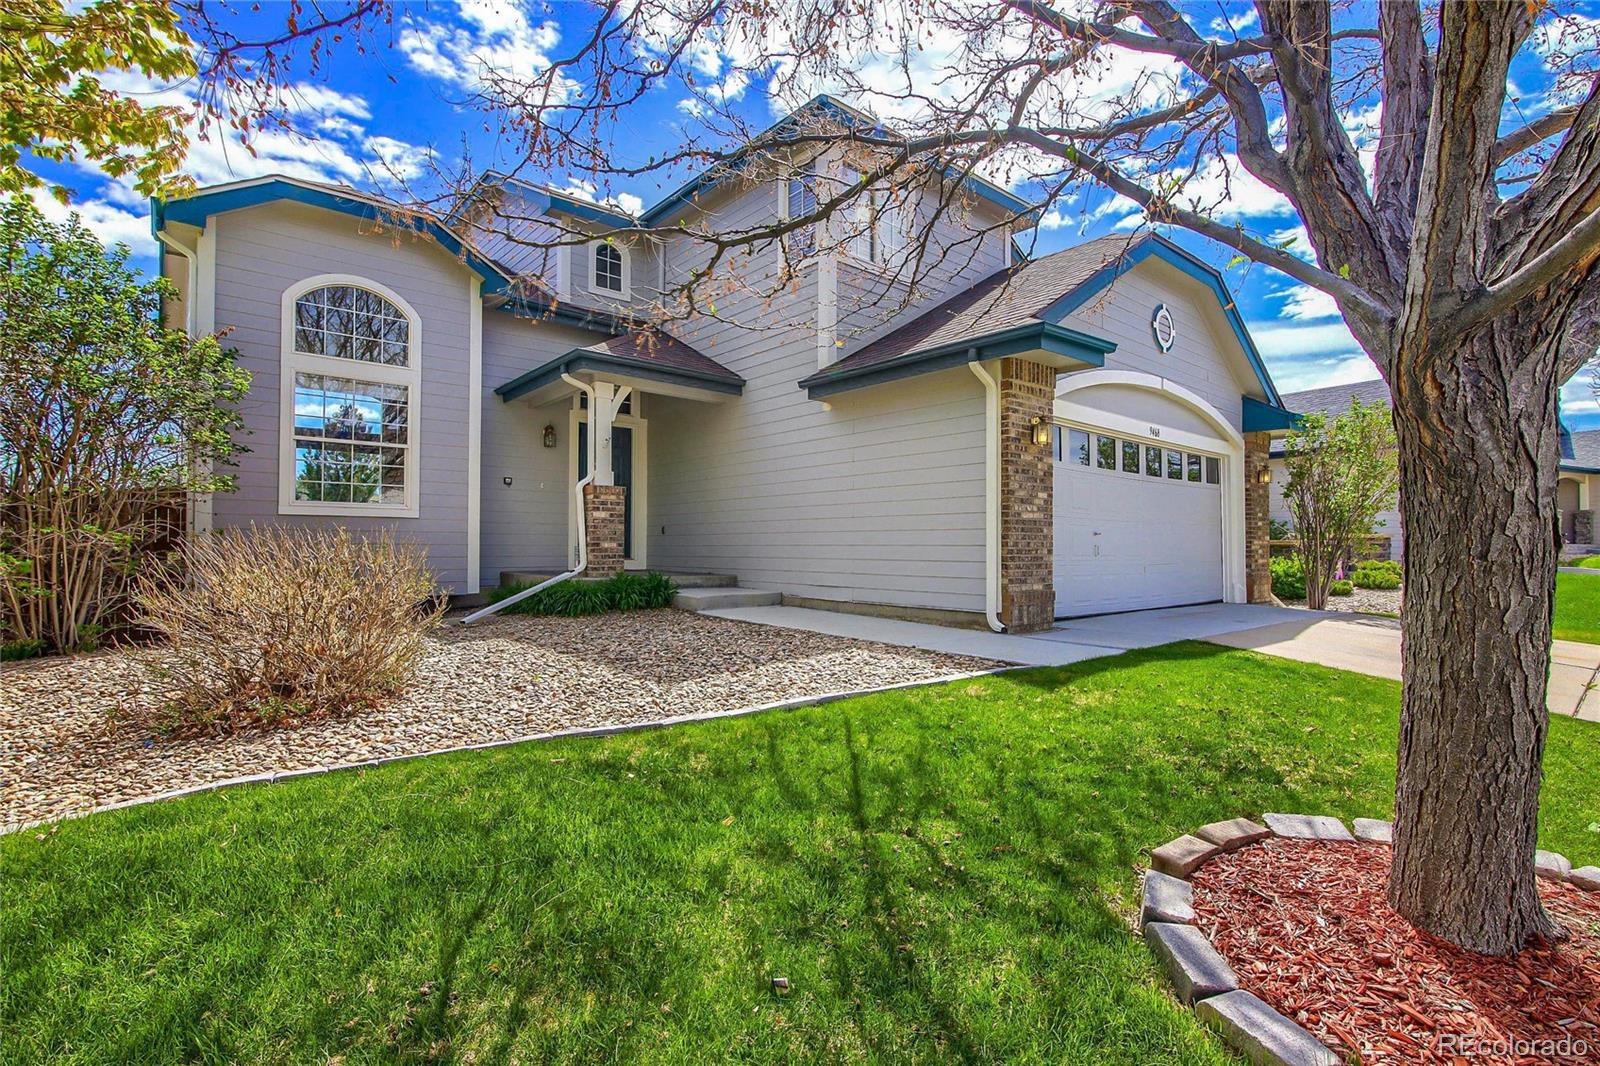 9468  troon village drive, Lone Tree sold home. Closed on 2023-11-20 for $655,000.